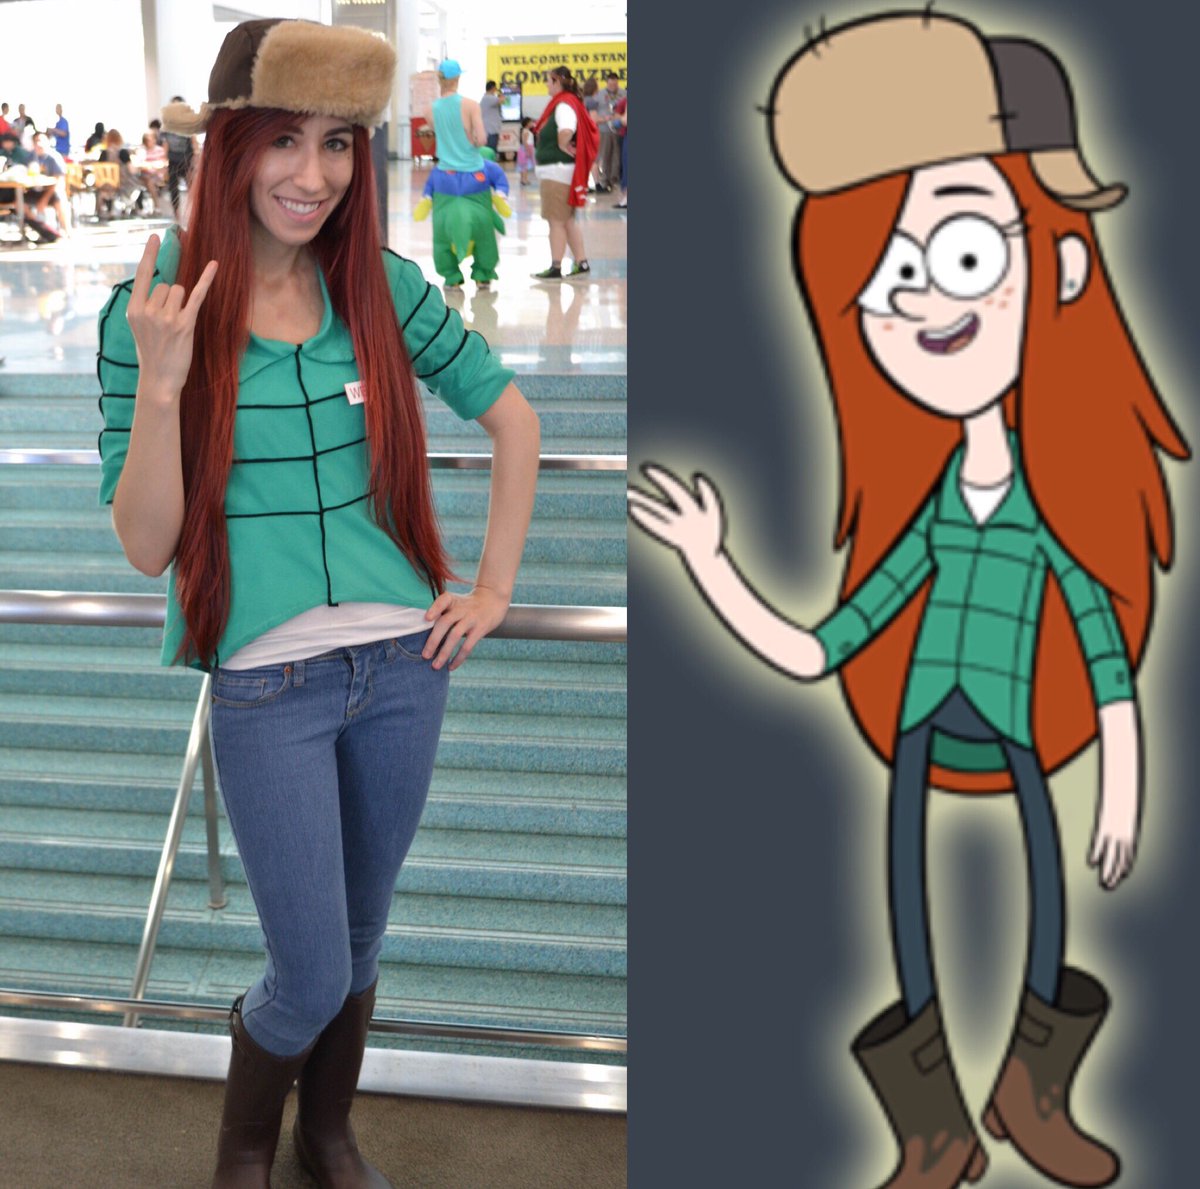 Cosplay vs character side-by-side of Wendy Corduroy from Gravity Falls. 